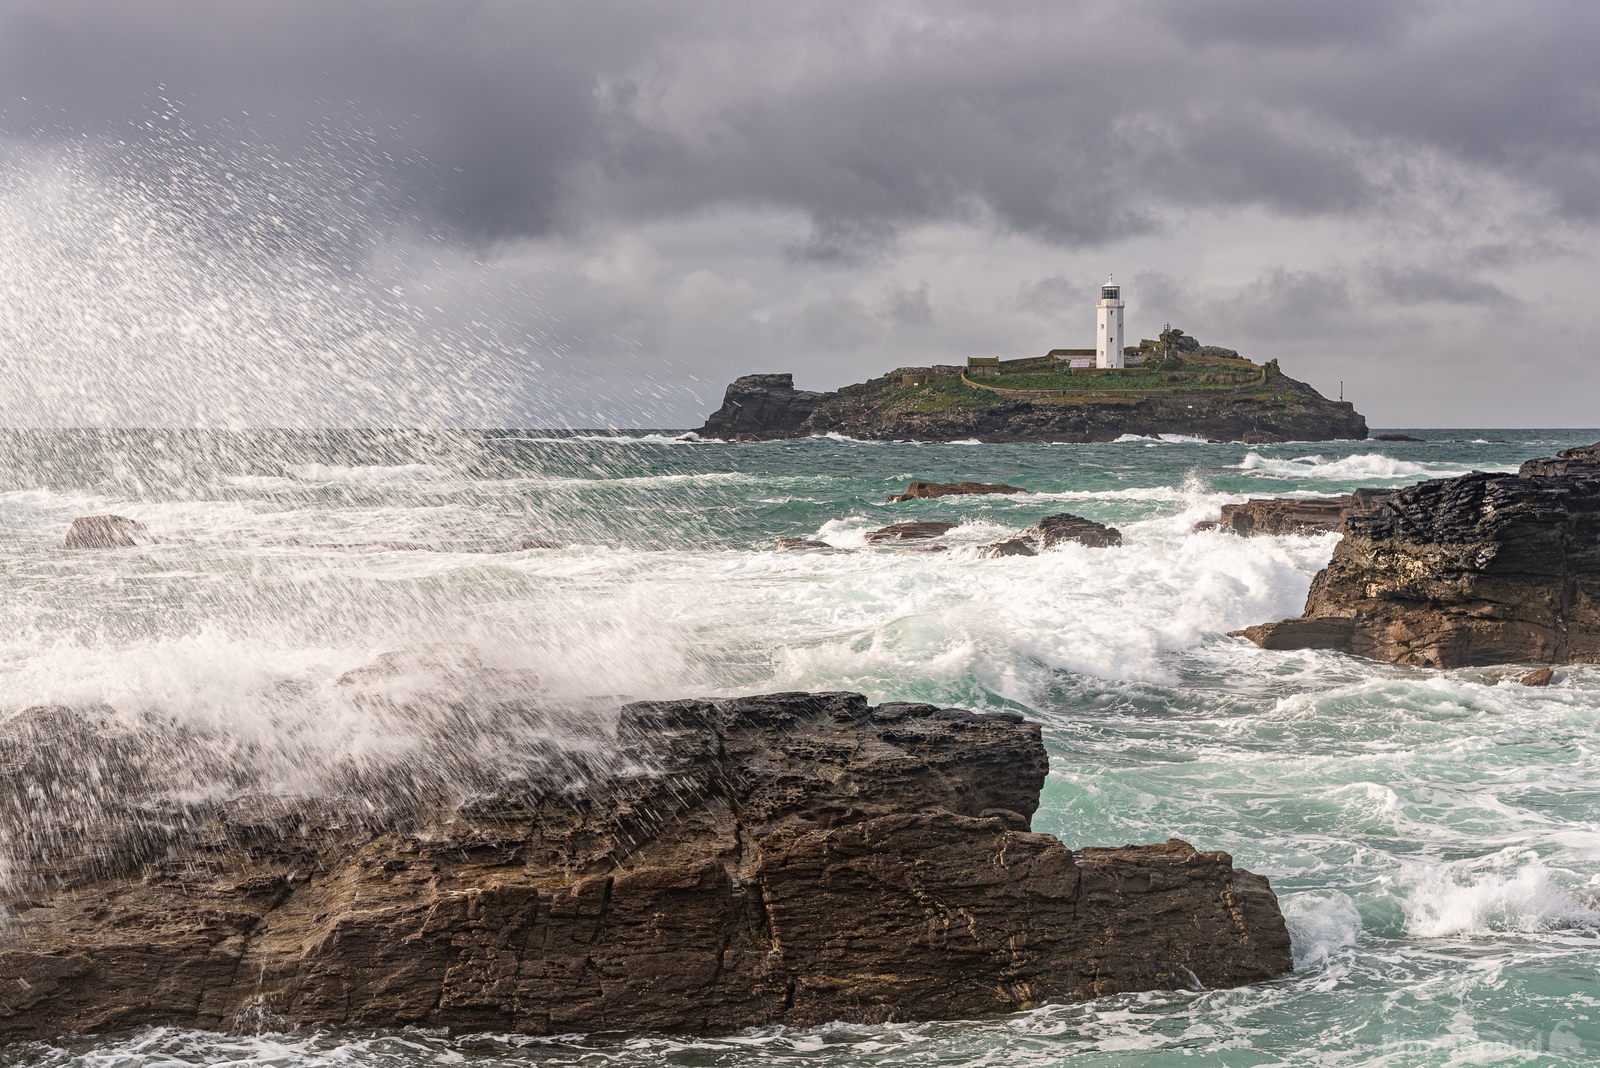 Image of Godrevy Lighthouse by Martin Stubbings